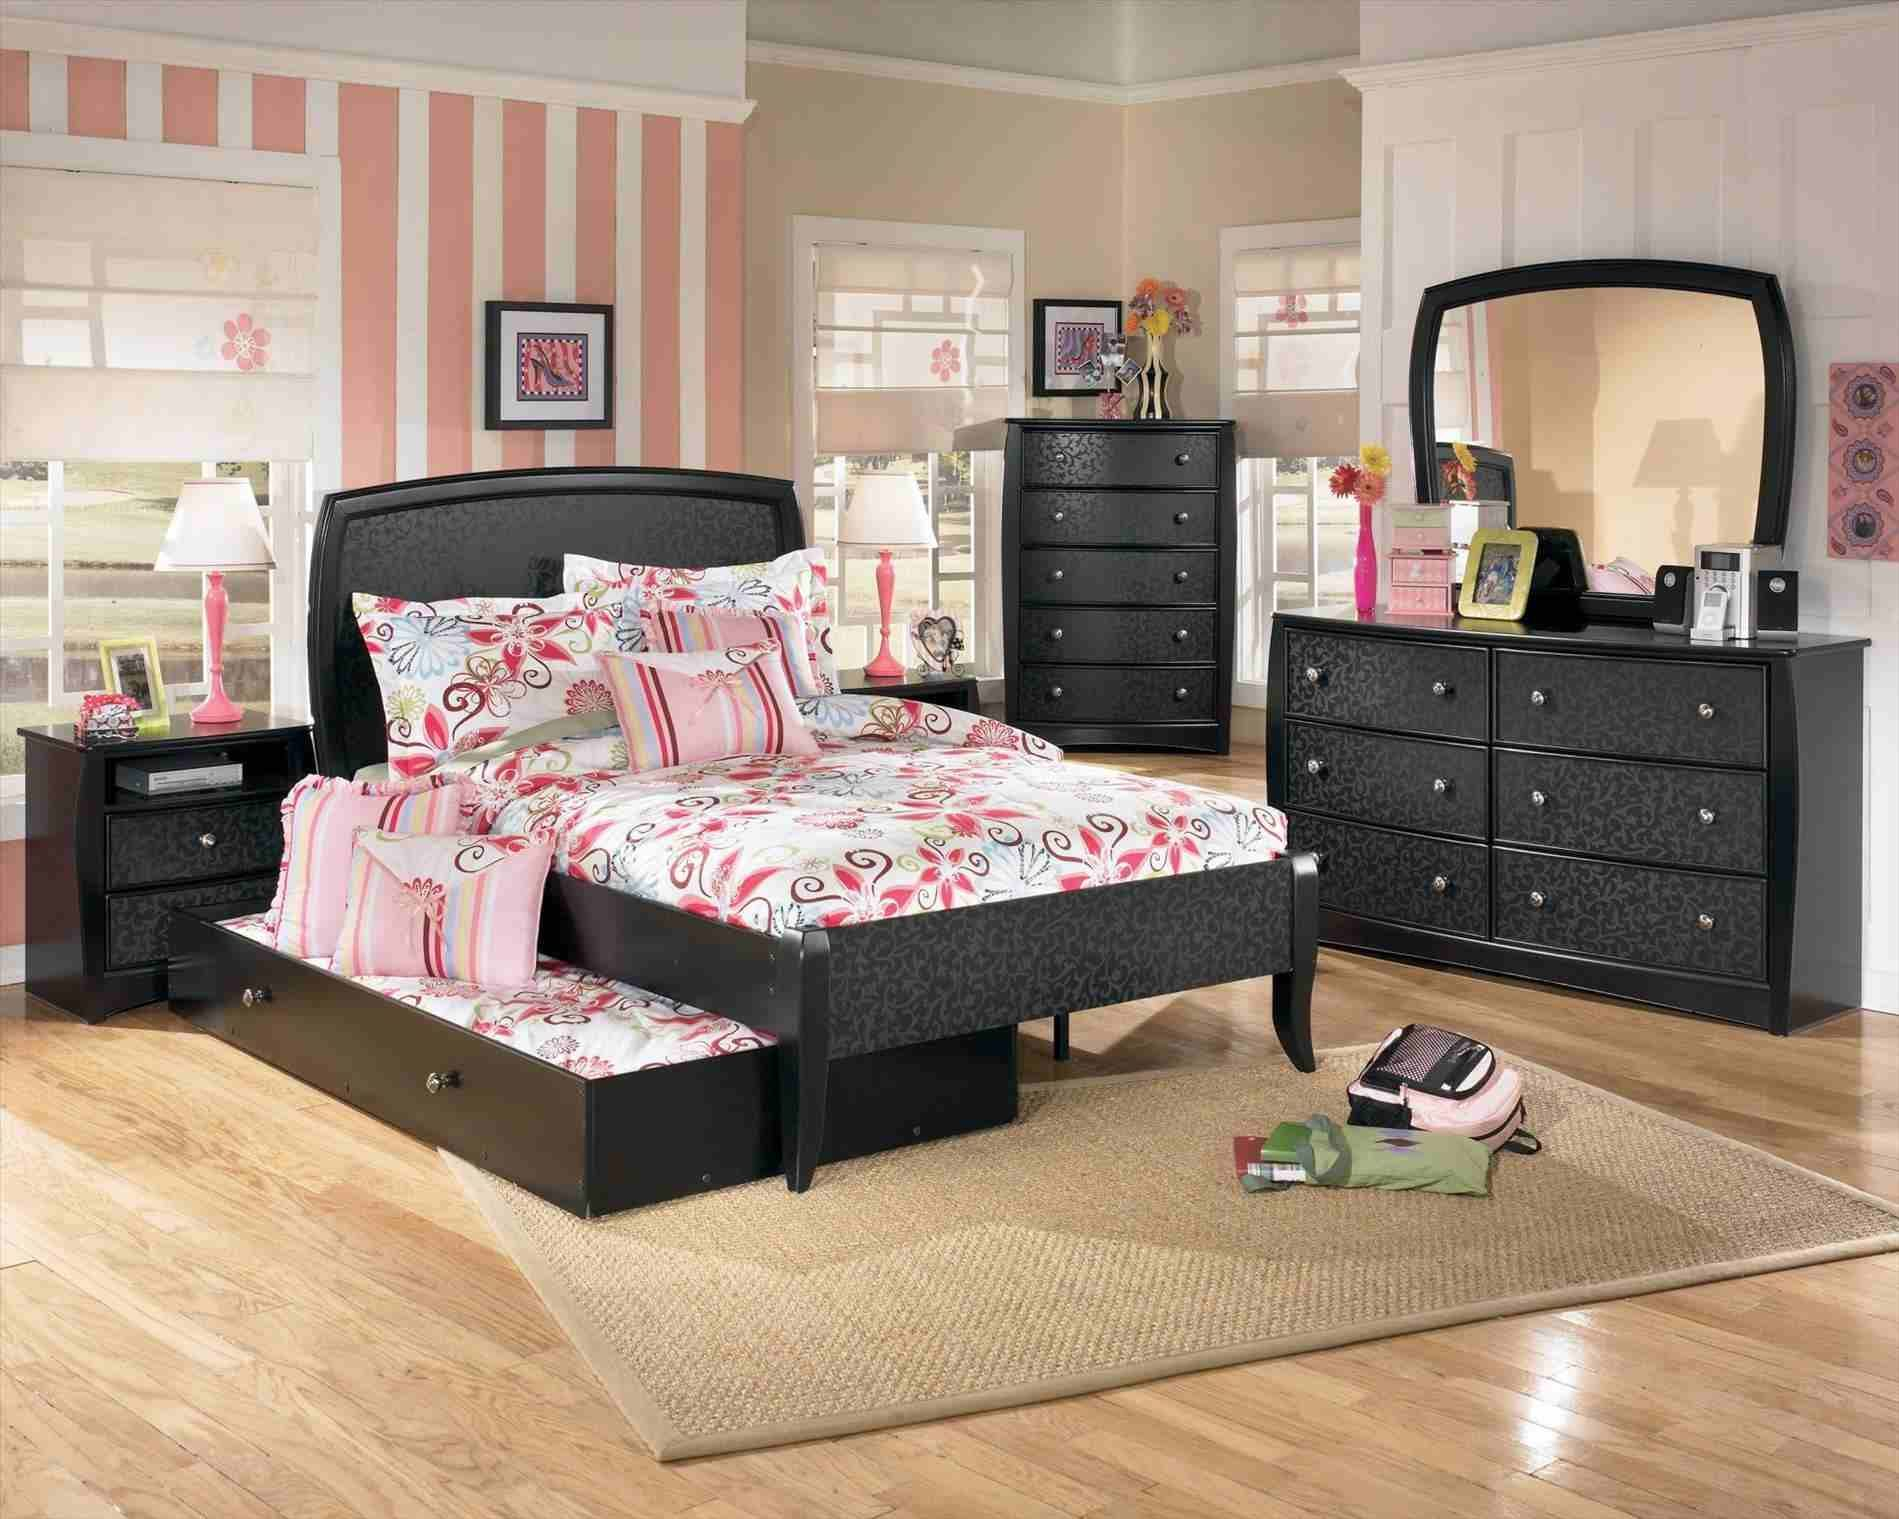 Erstaunlich Cute Kids Bedroom Sets For Girls Designs King Black with size 1899 X 1519